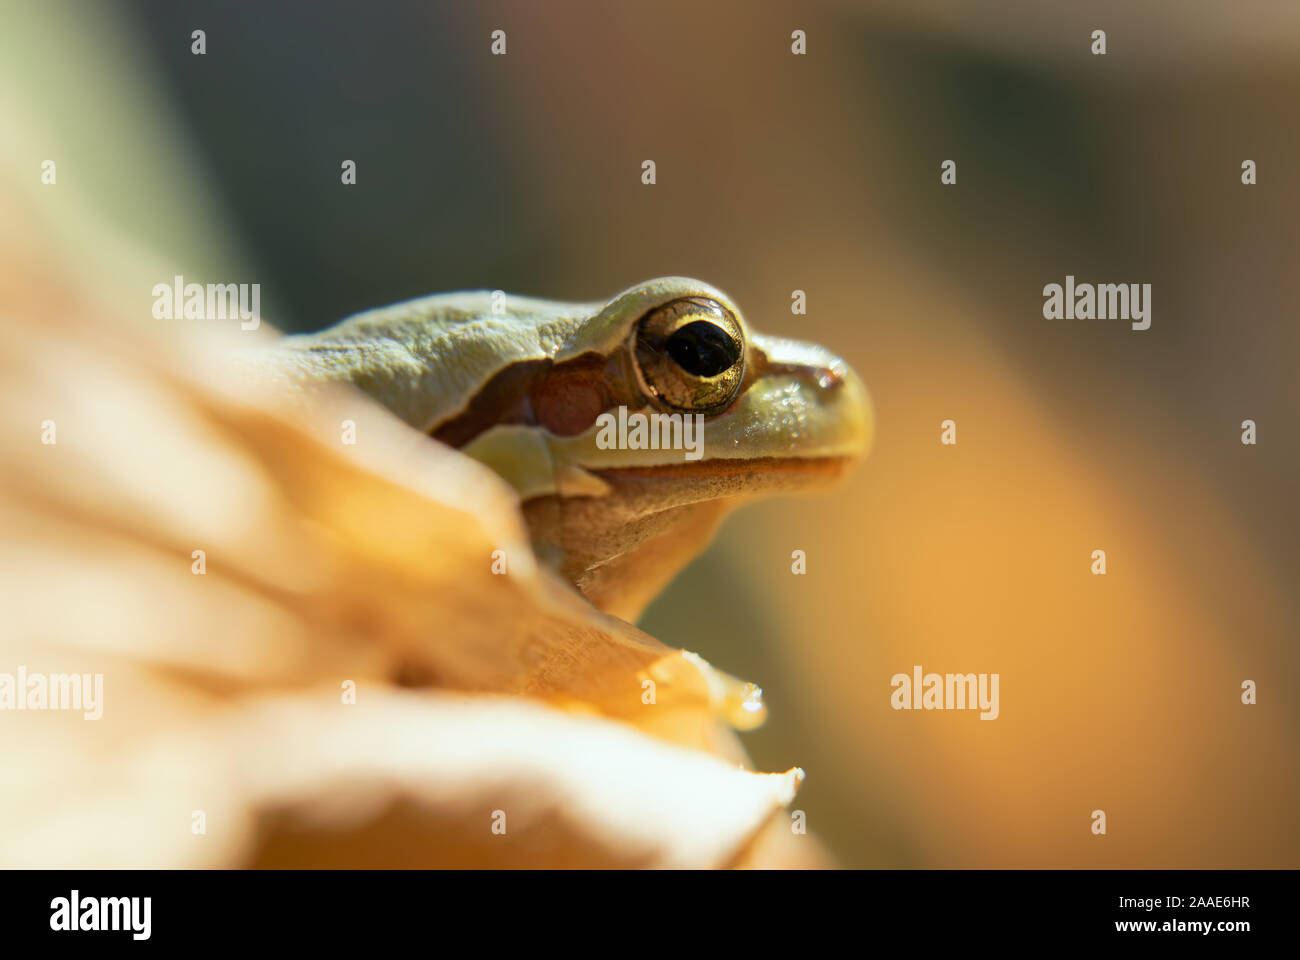 Frog camouflaging in nature Stock Photo